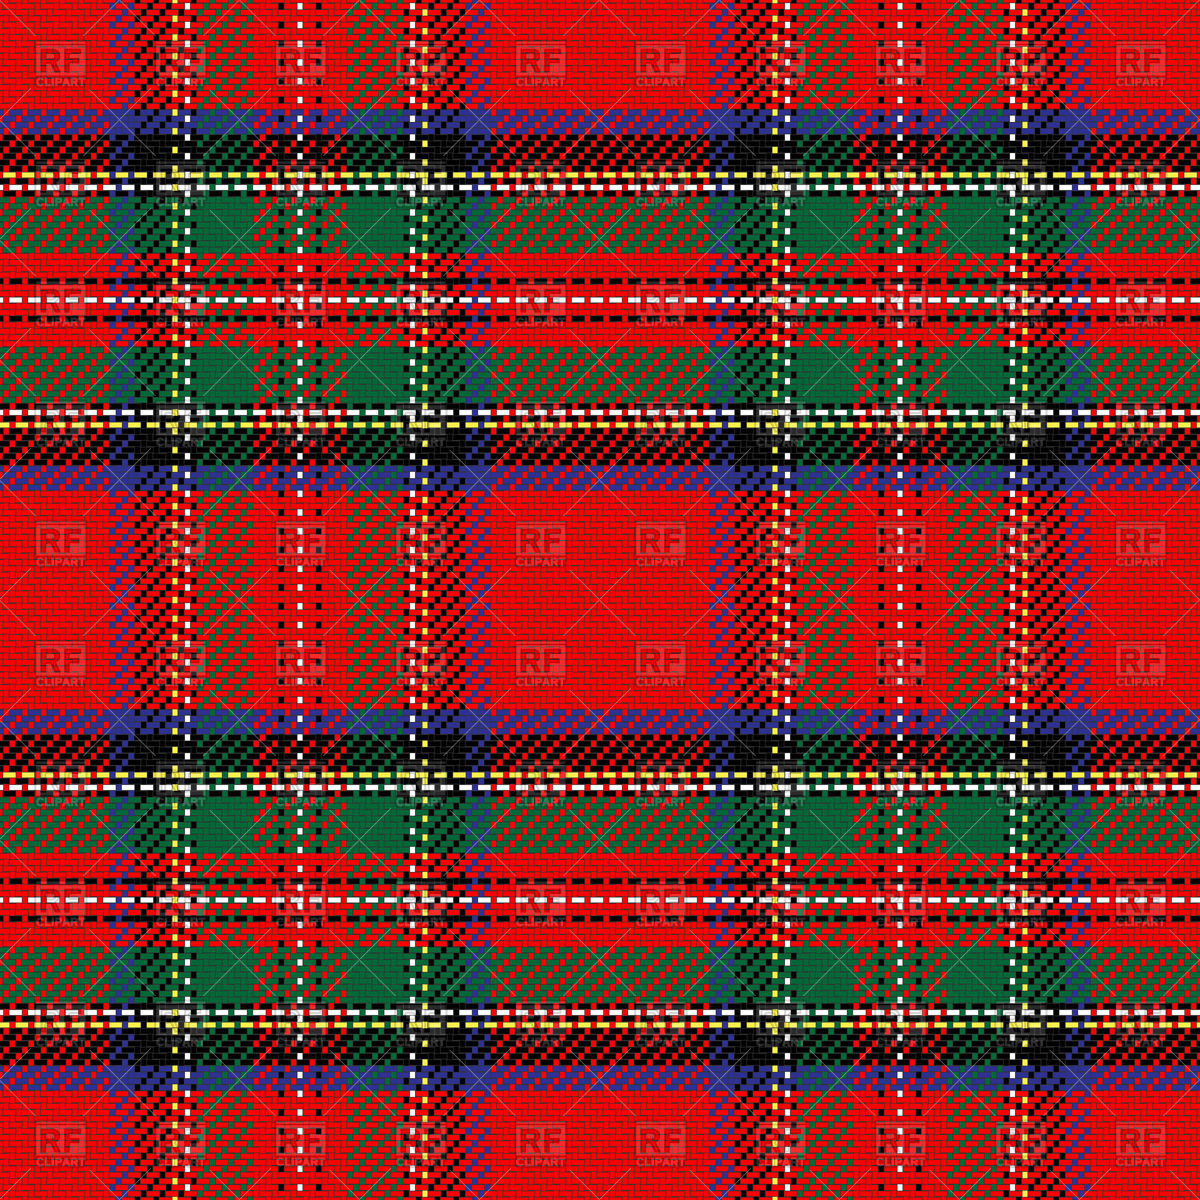 Red Scottish tartan 44065 Backgrounds Textures Abstract download